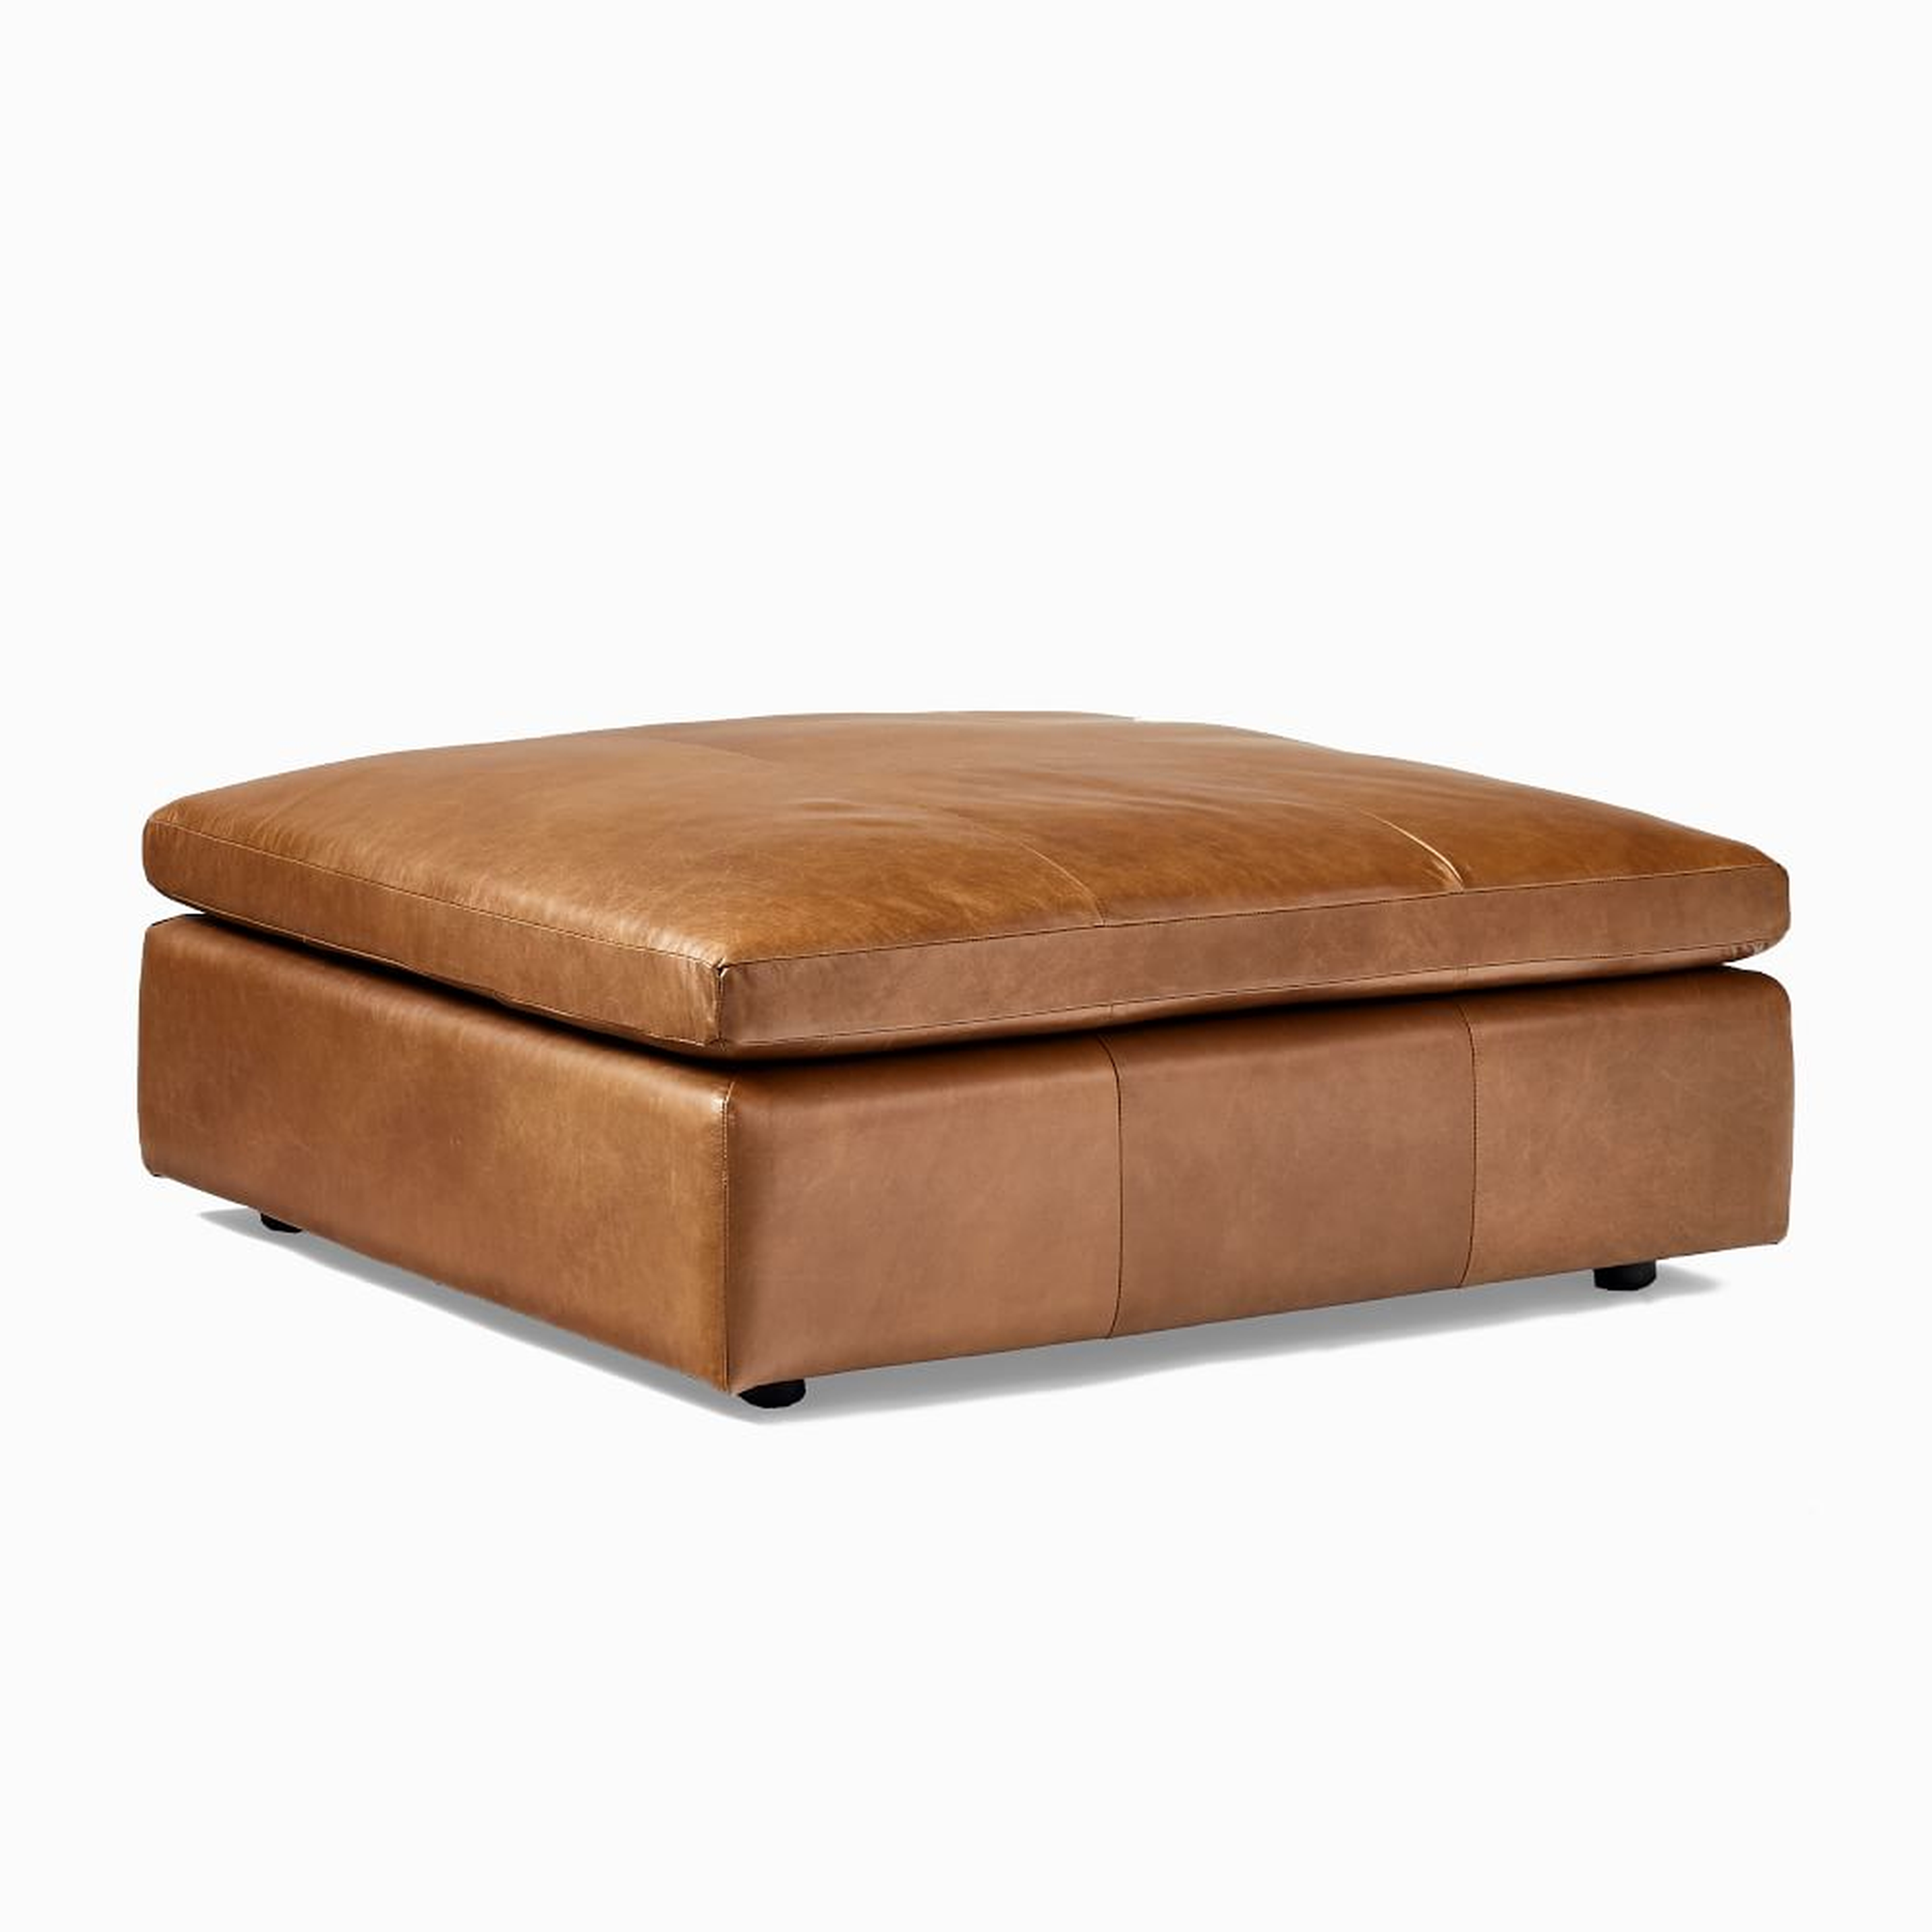 Harmony Modular Ottoman, Down, Saddle Leather, Nut, Concealed Supports - West Elm